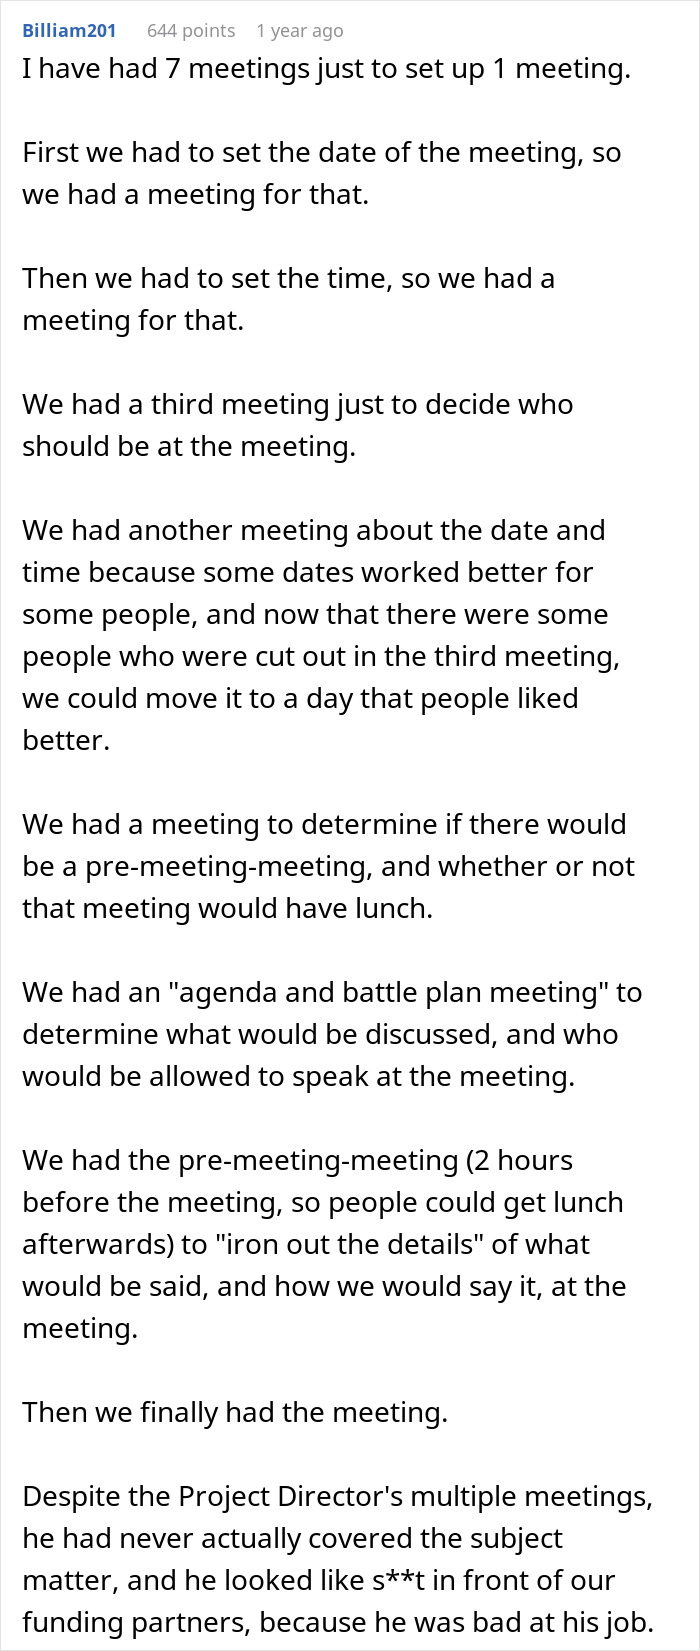 New Director Hosts A Meeting At 8 AM, Despite The Line Manager's Warnings Regarding The Process, Causing Production To Stall